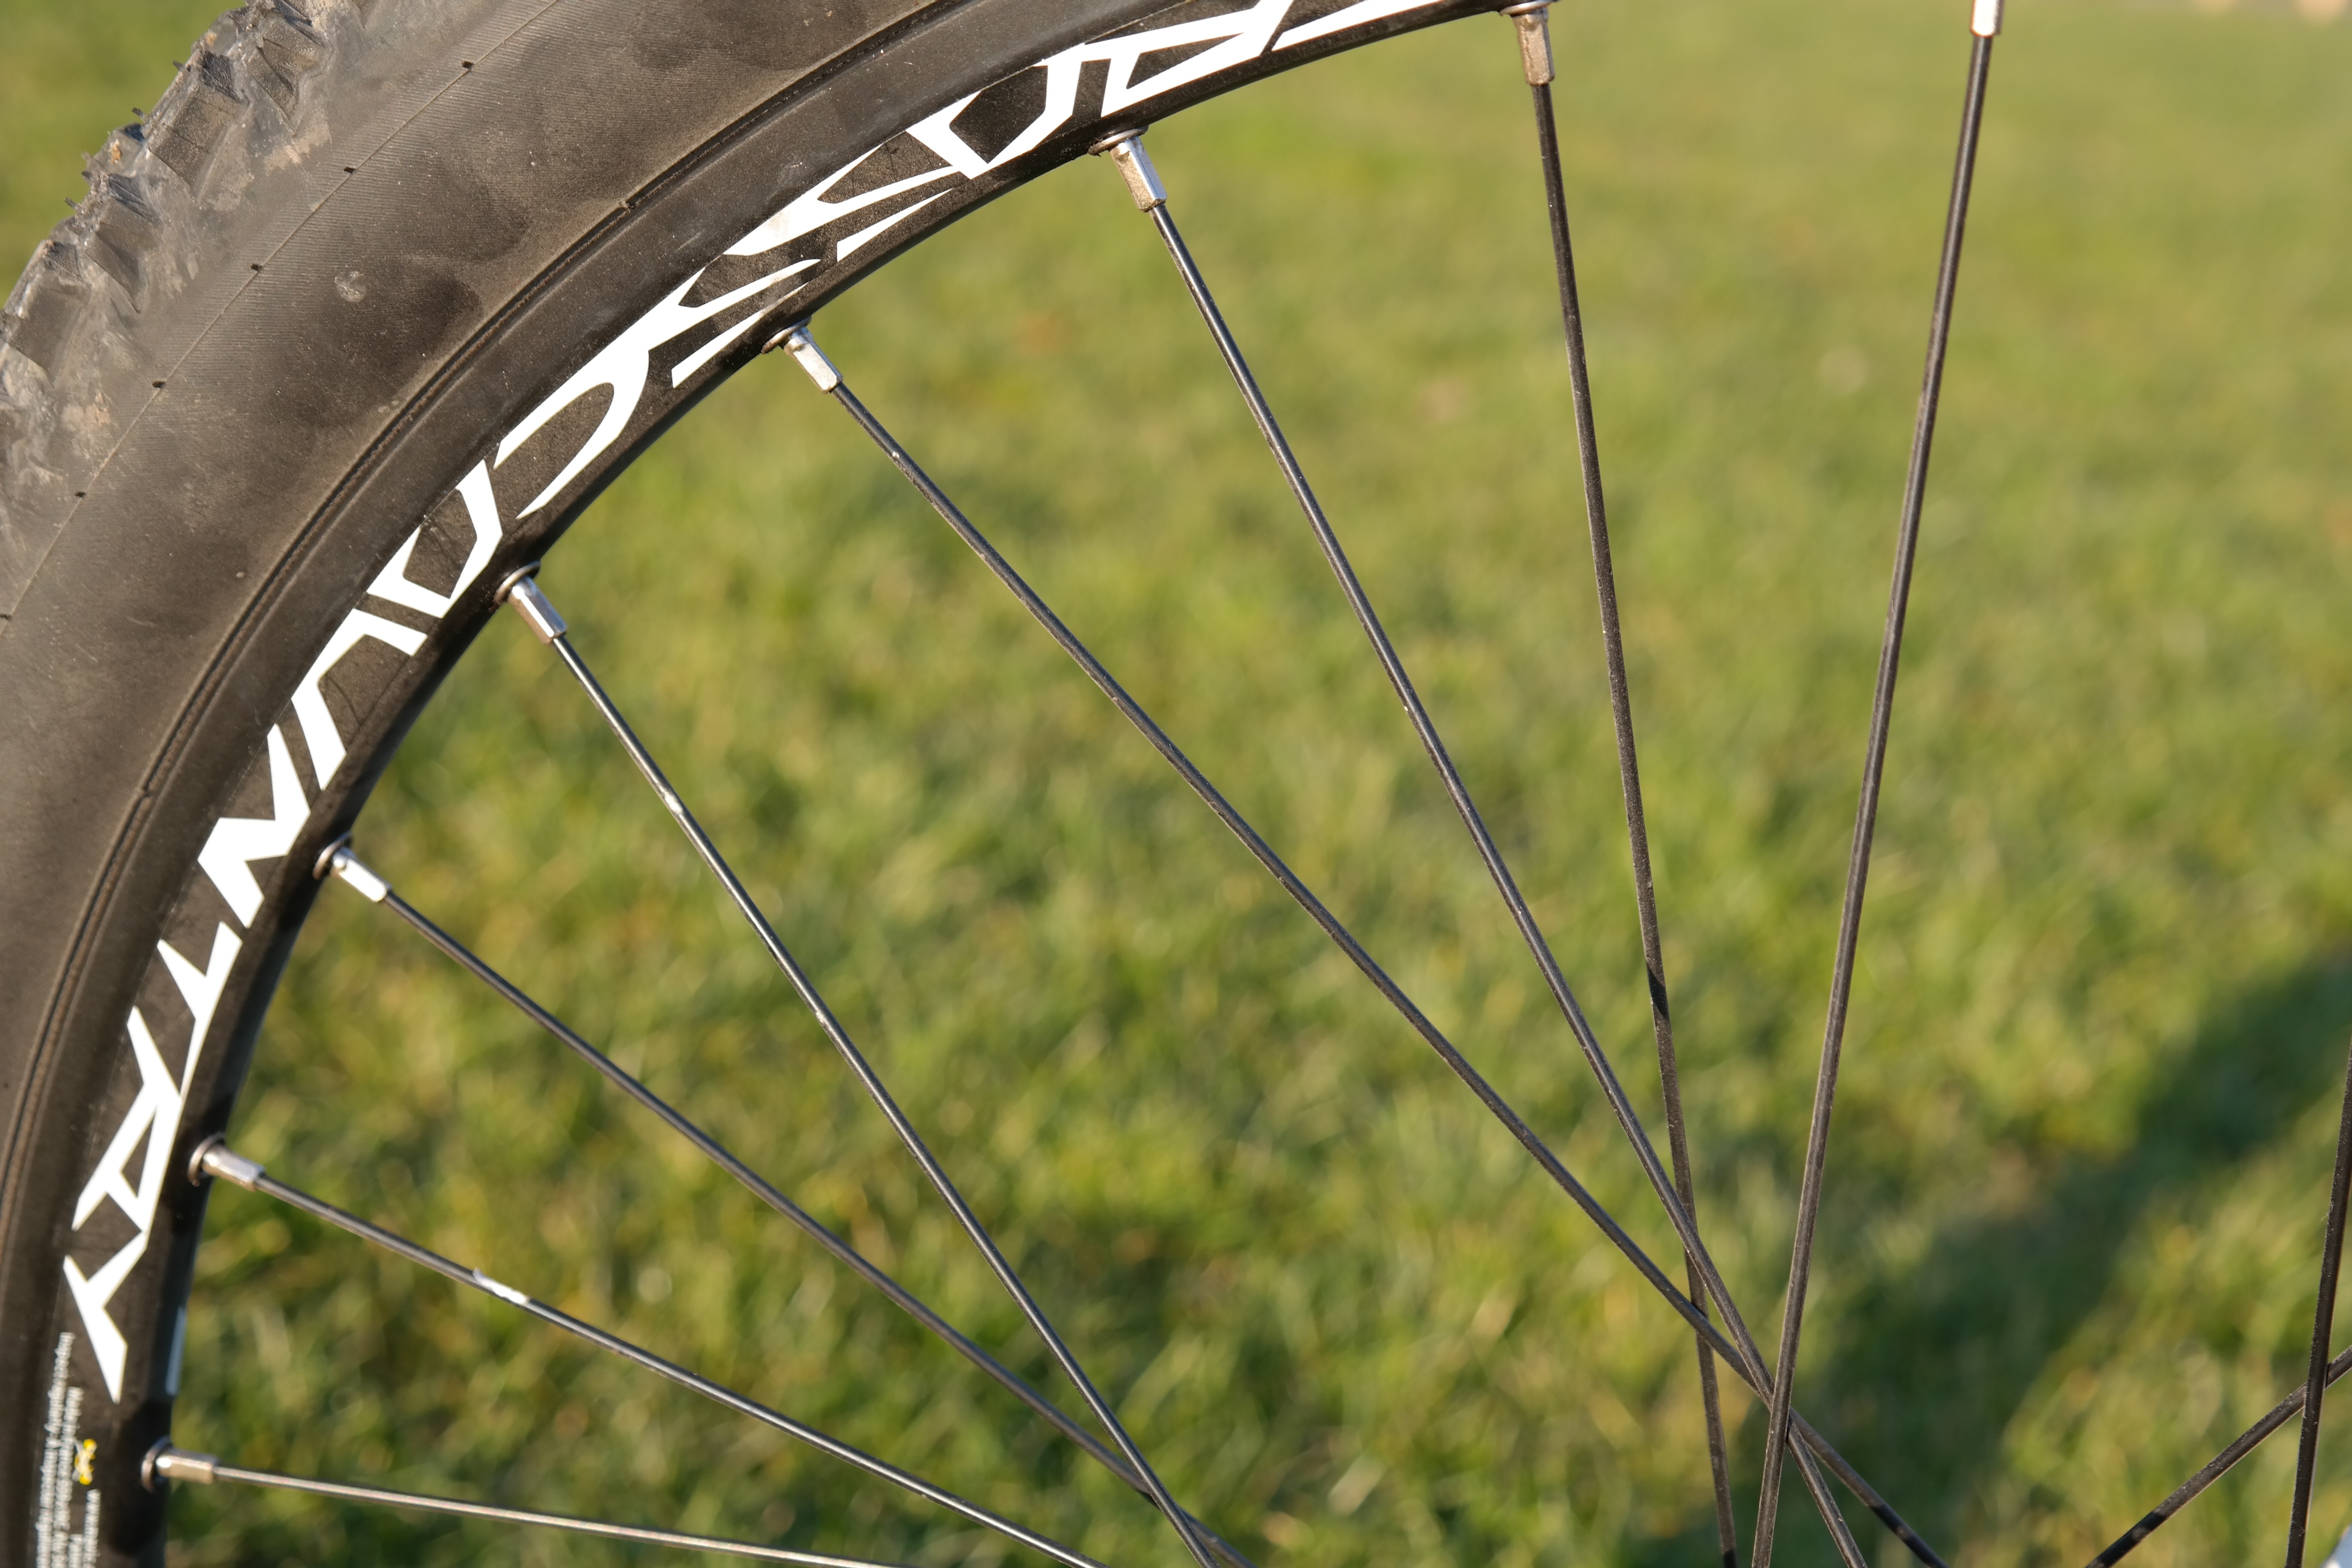 bicycle wheel and tire